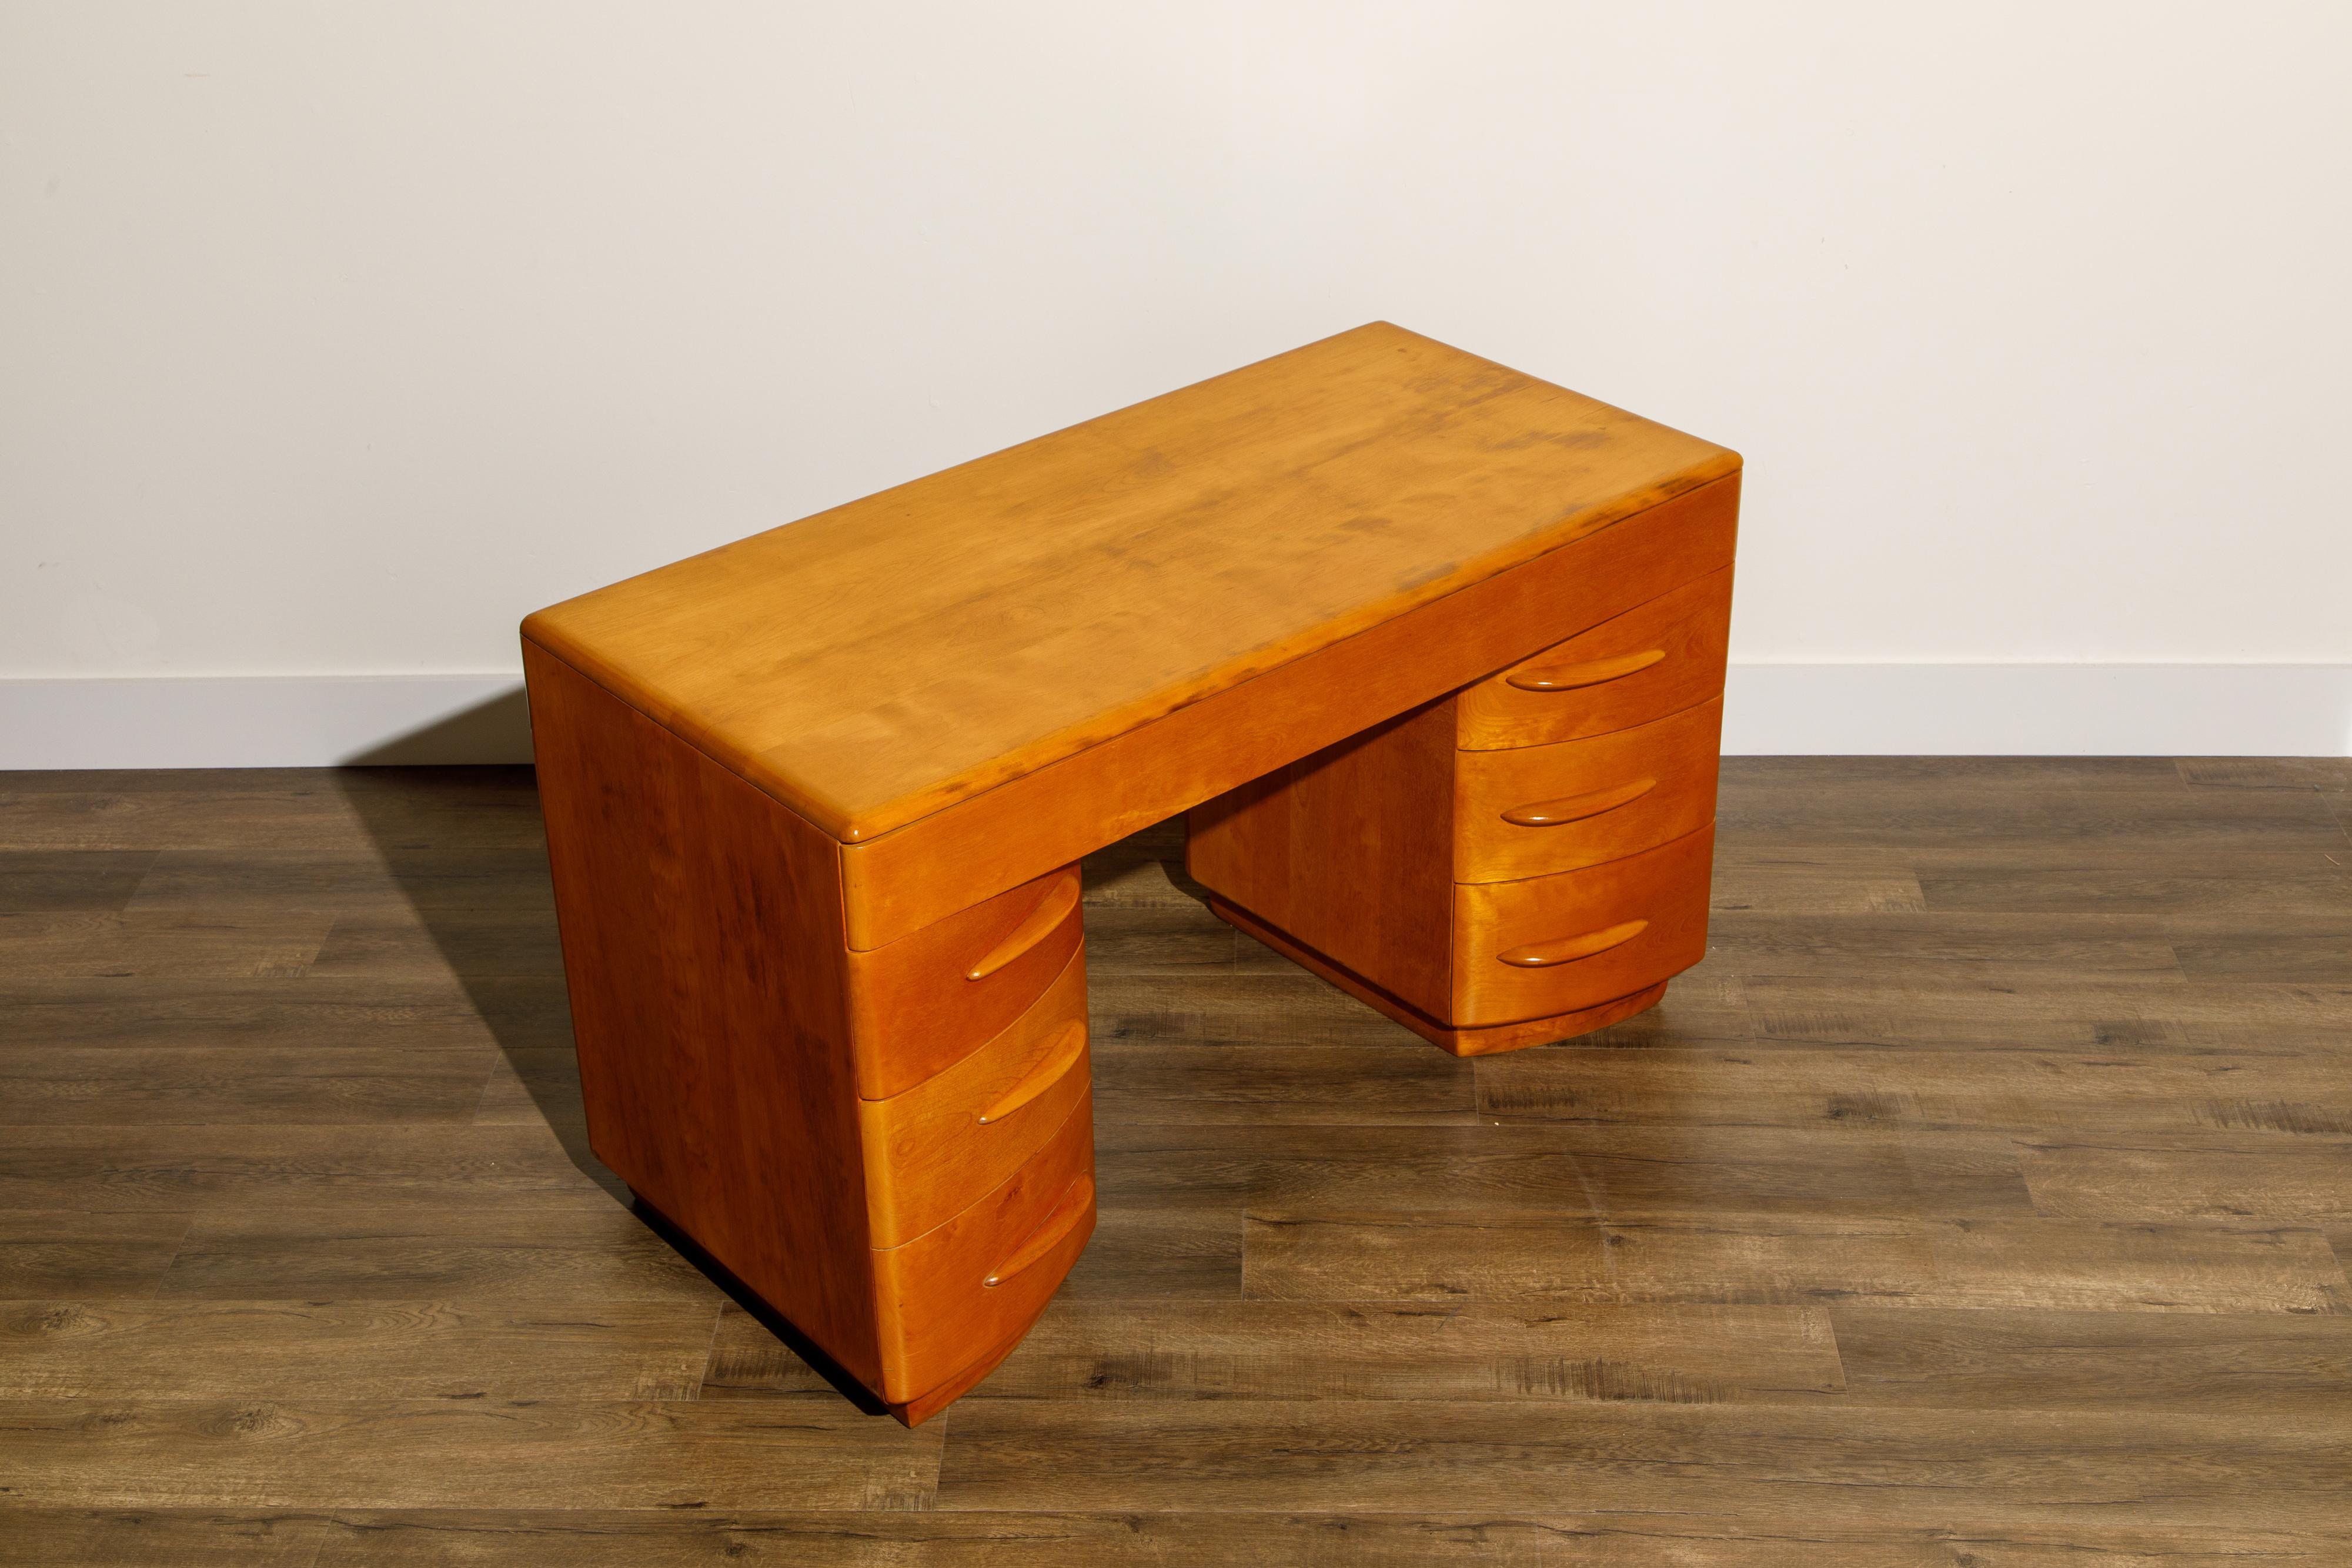 Mid-20th Century Kneehole Desk by Count Alexis de Sakhoffsky for Heywood Wakefield, 1940s, Signed